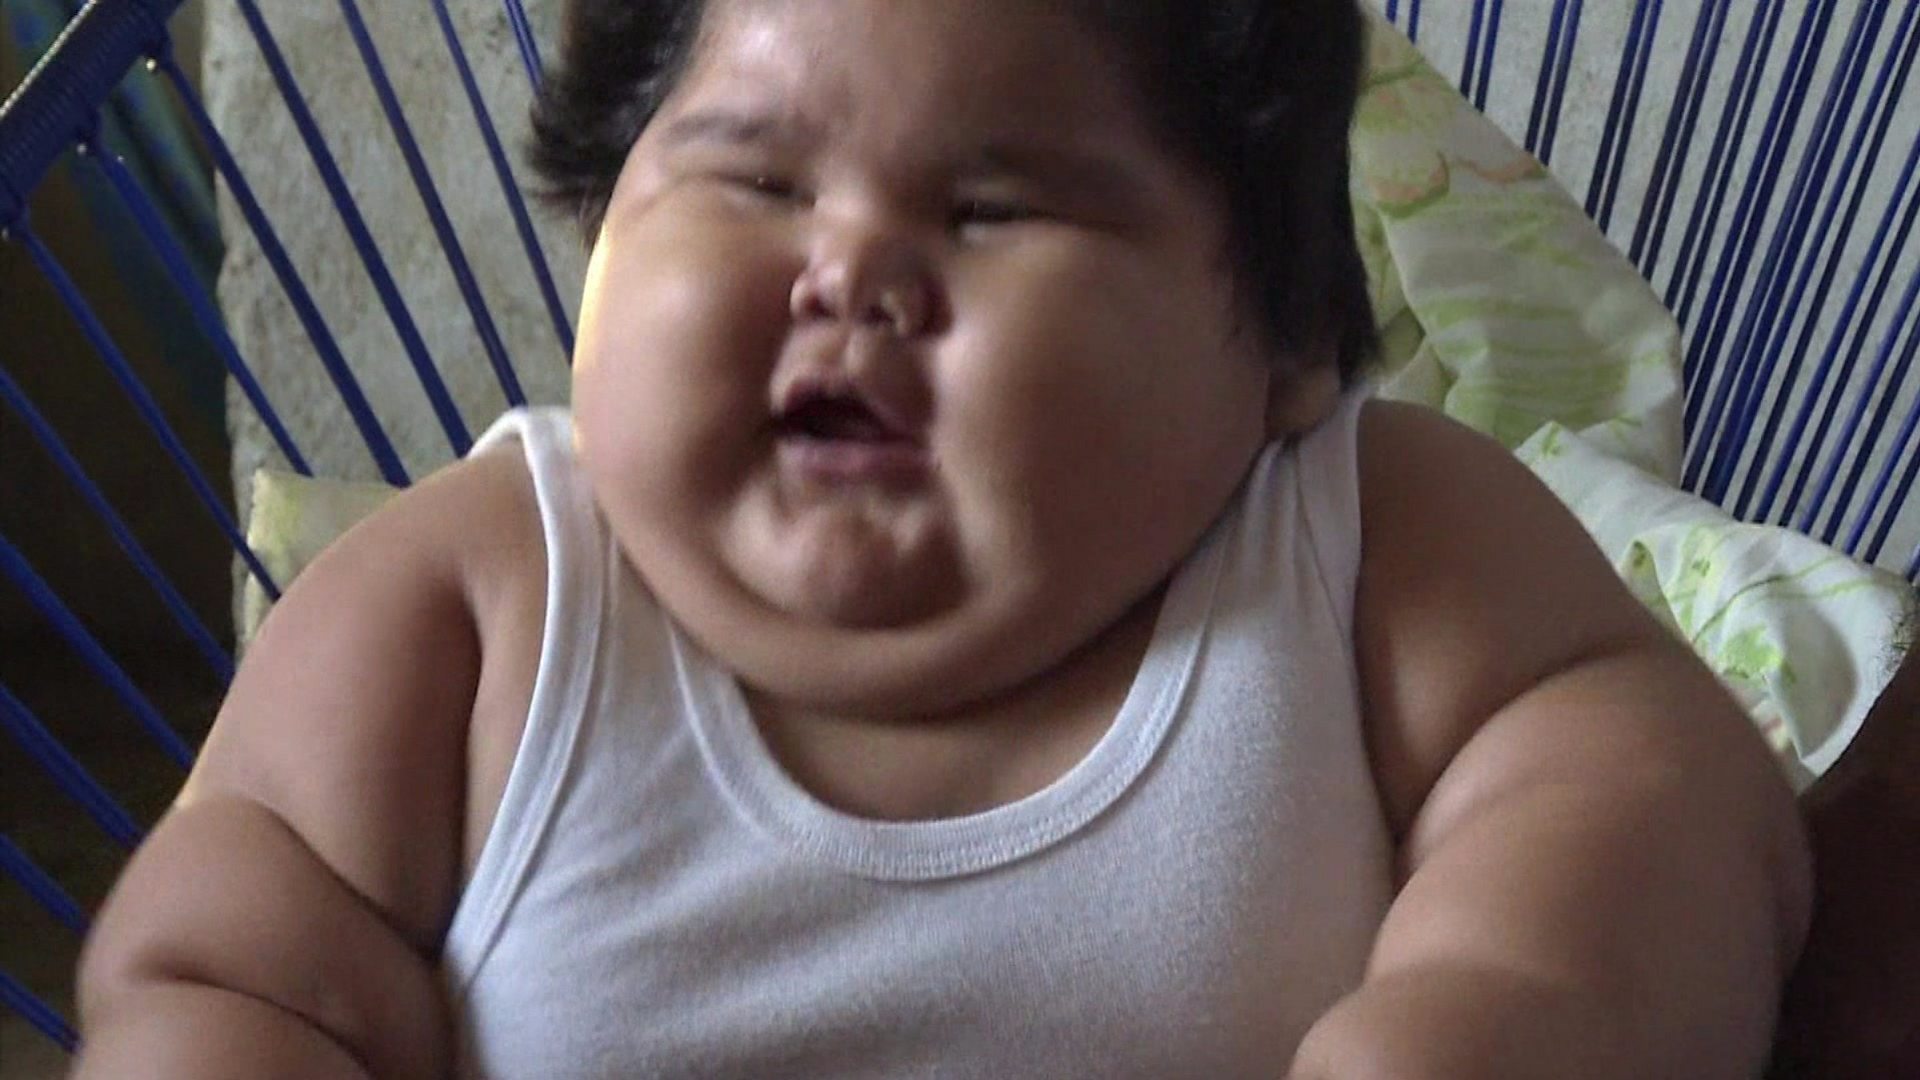 Fat Baby In India Ballooned To 55 Pounds | vlr.eng.br